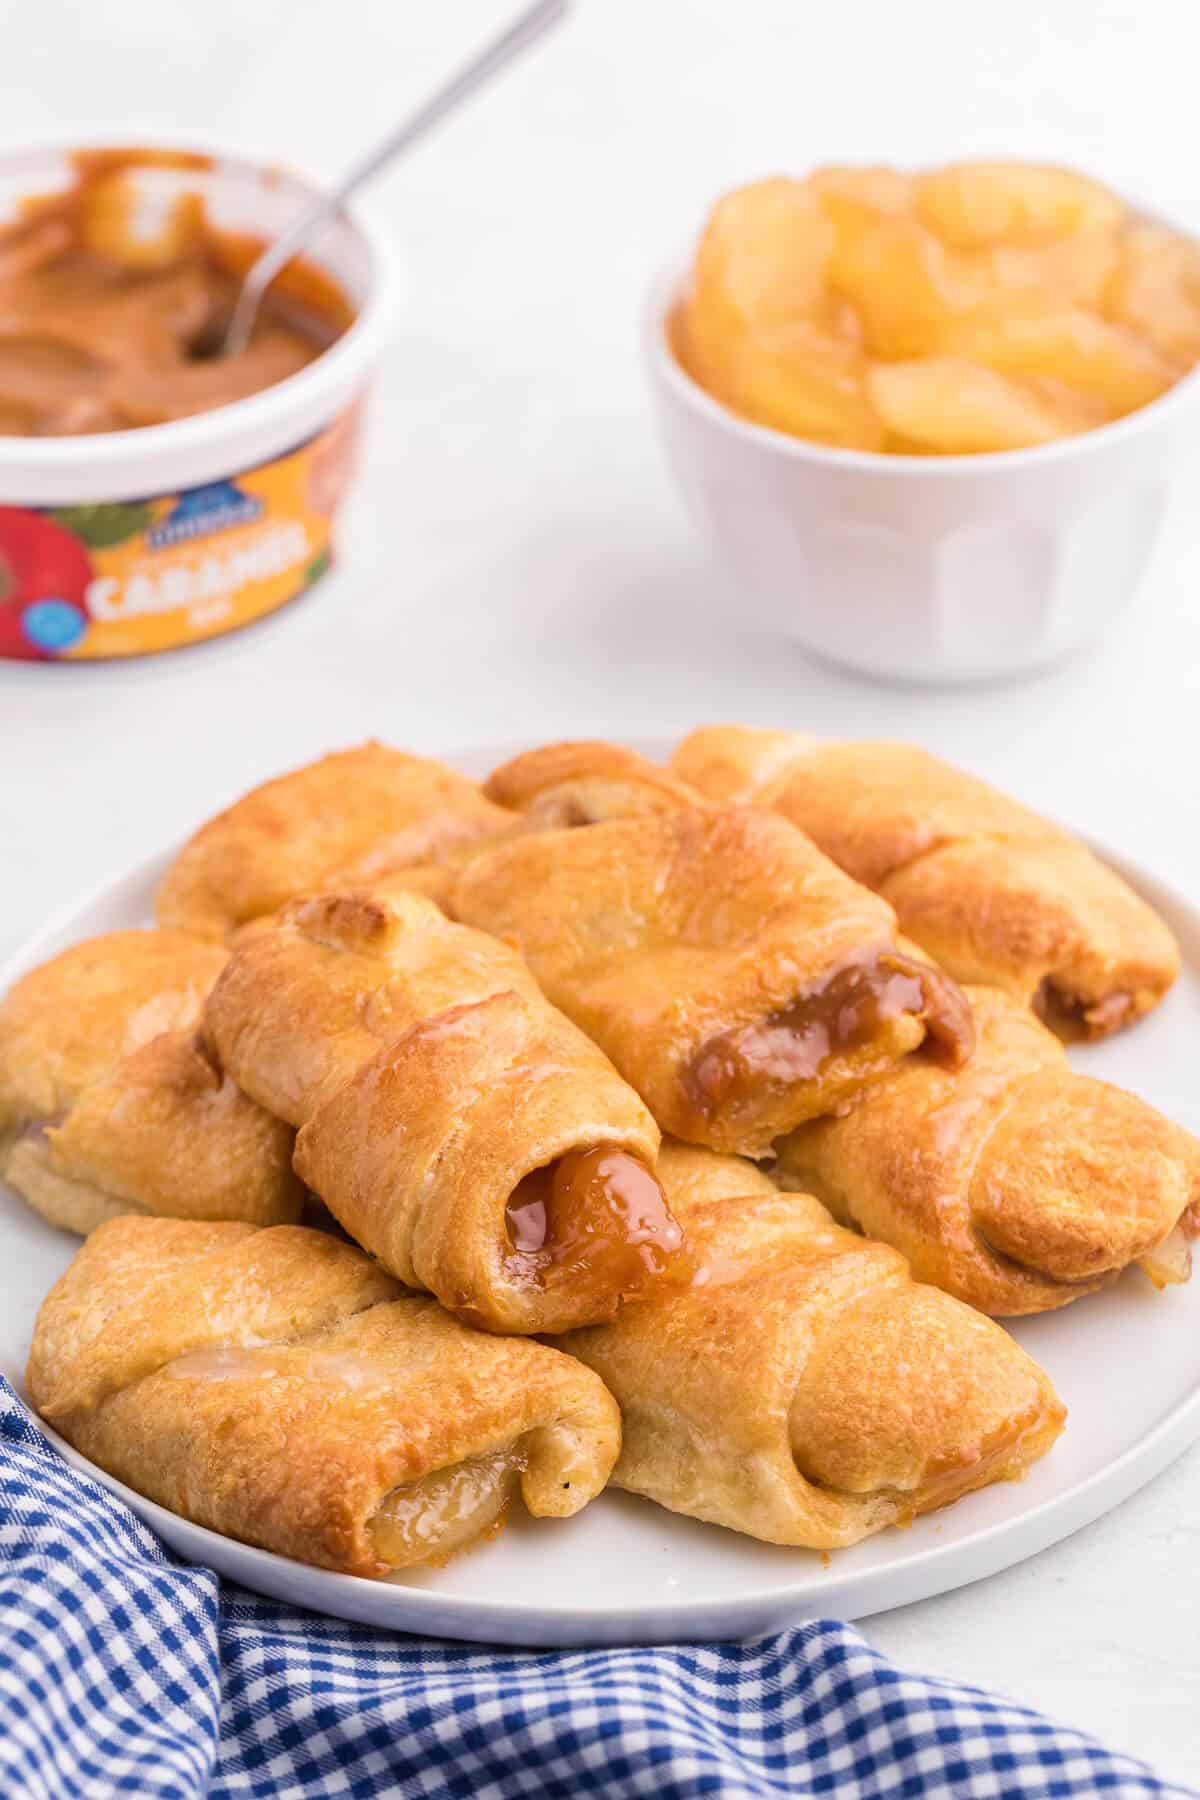 Caramel Apple Pie Crescents - The most simple apple dessert made in your air fryer in minutes! Buttery golden crescent roll pastry is wrapped around sweet apple pie filling and caramel with a sugar drizzle on top.